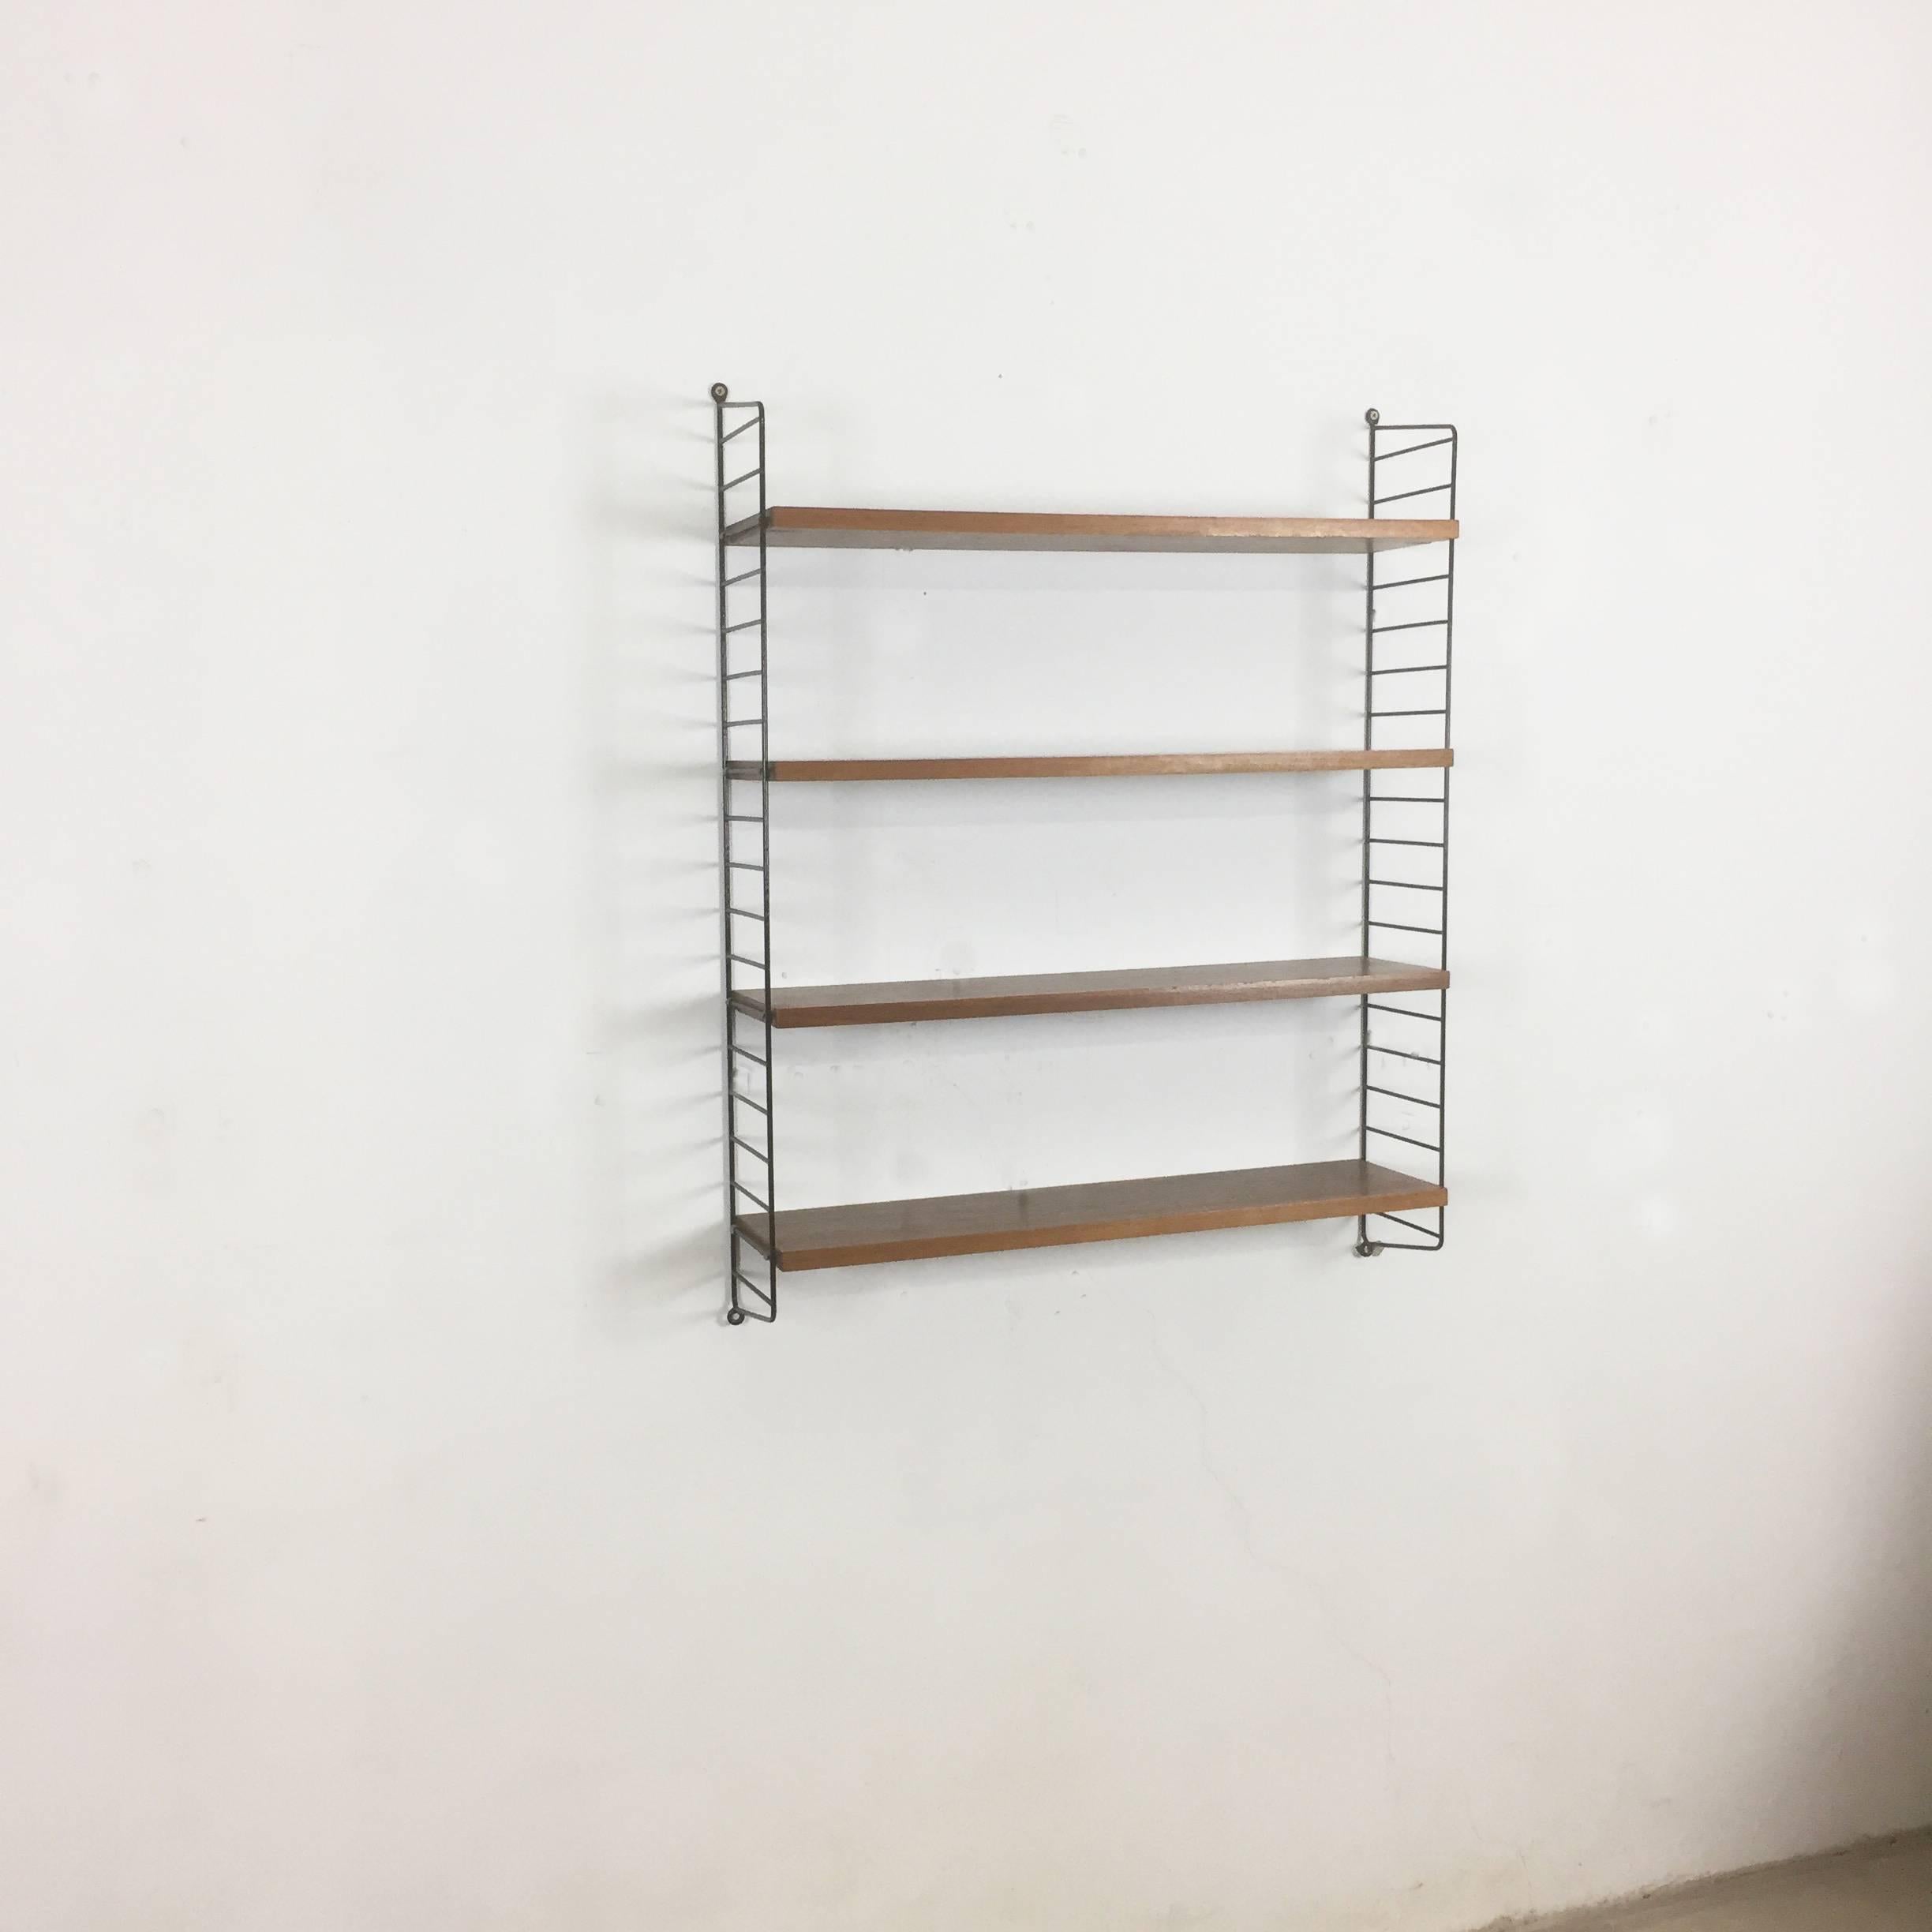 String Regal wall unit

Made in Sweden

Bokhyllan 'The Ladder Shelf'

Design: Nils und Kajsa Strinning, 1949

The architect Nisse Strinning was born in 1917. From 1940-1947 he studied architecture in Stockholm, before he designed the